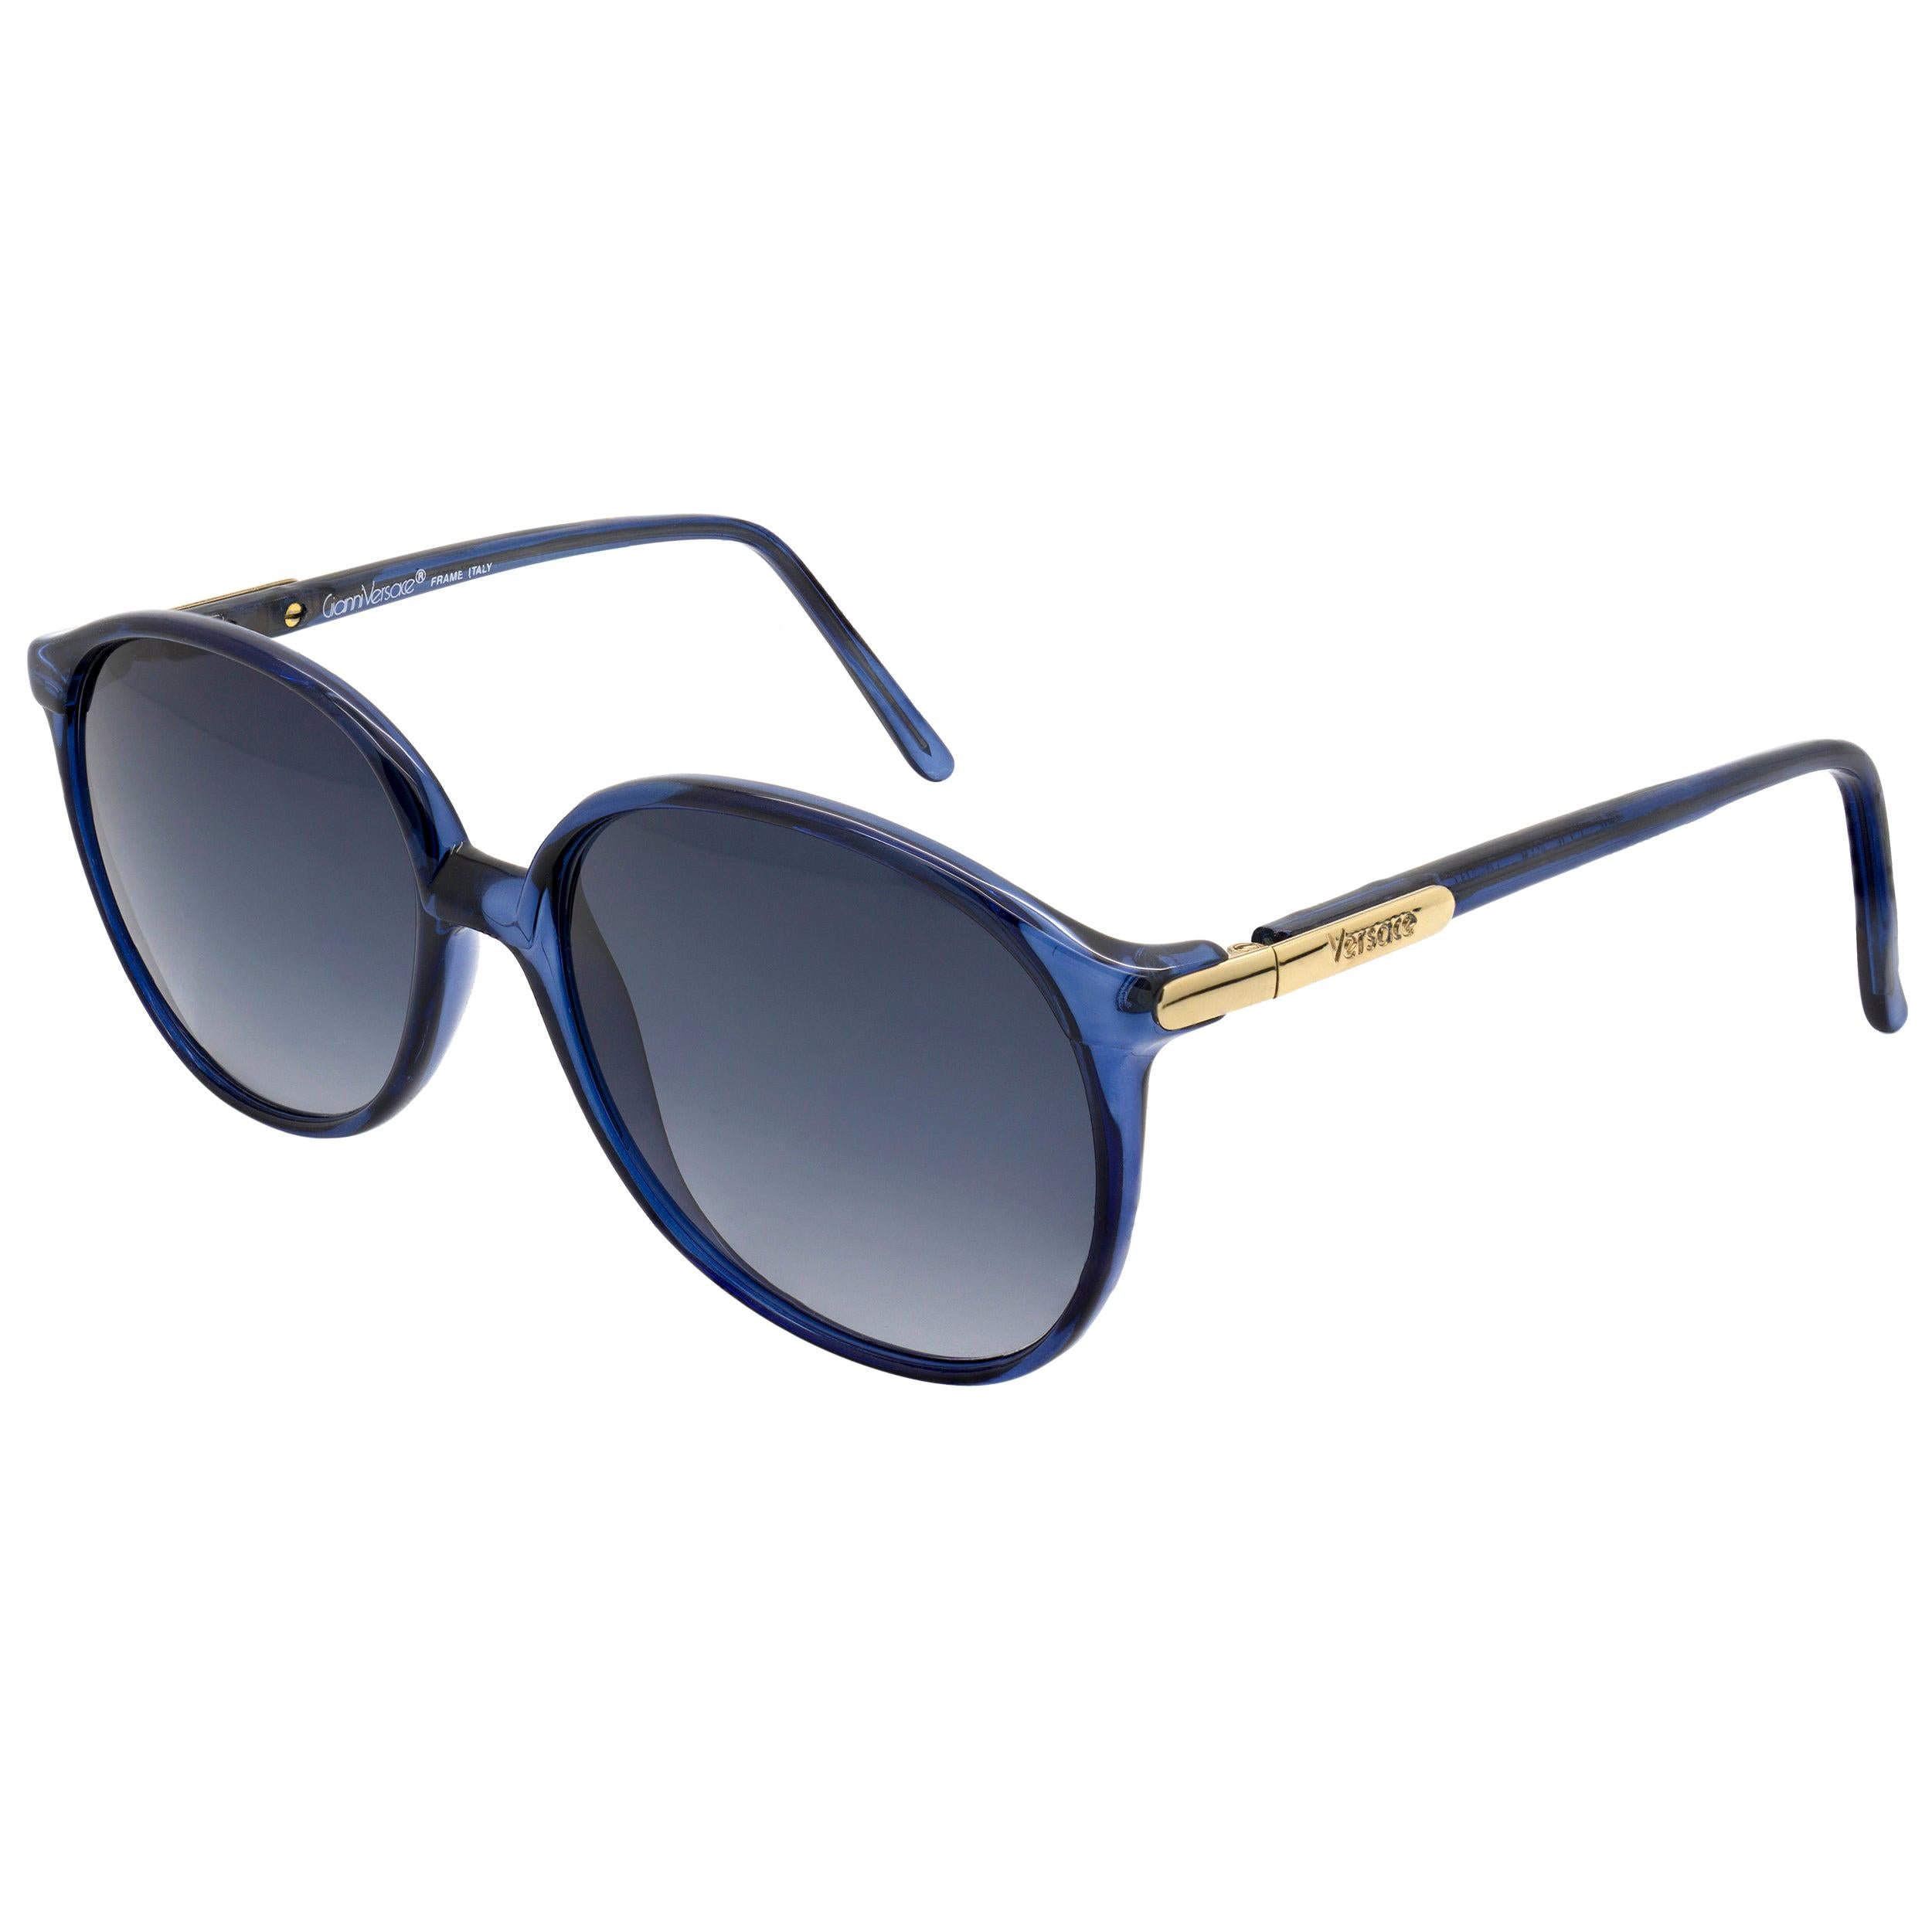 Gianni Versace sunglasses for women For Sale